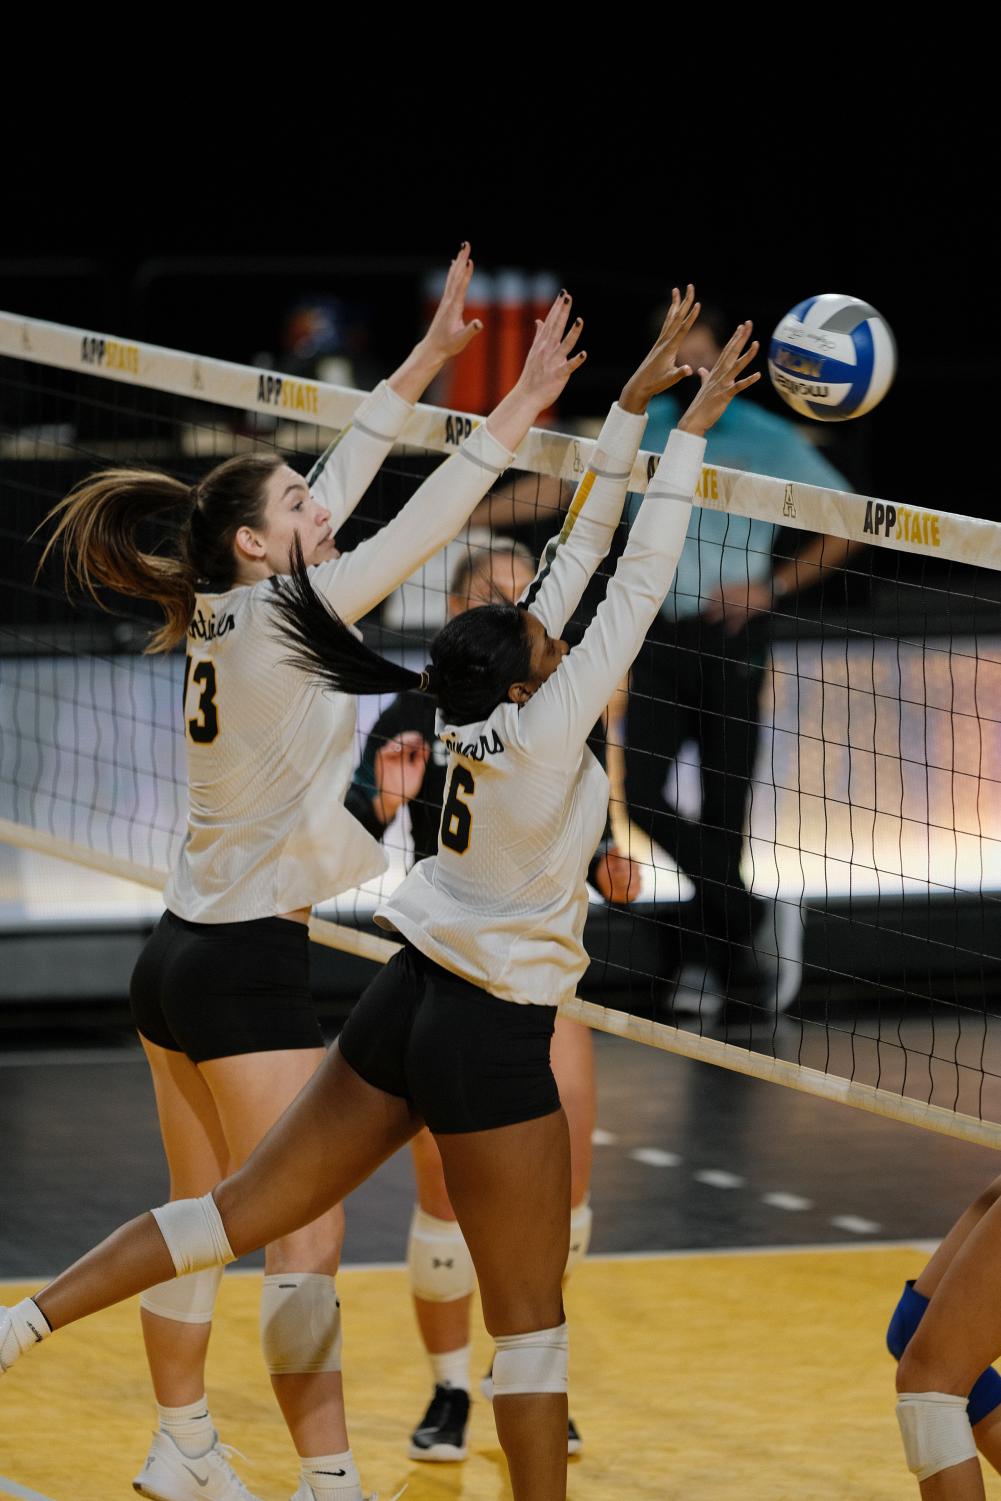 App State volleyball falls to Coastal Carolina in home finale The